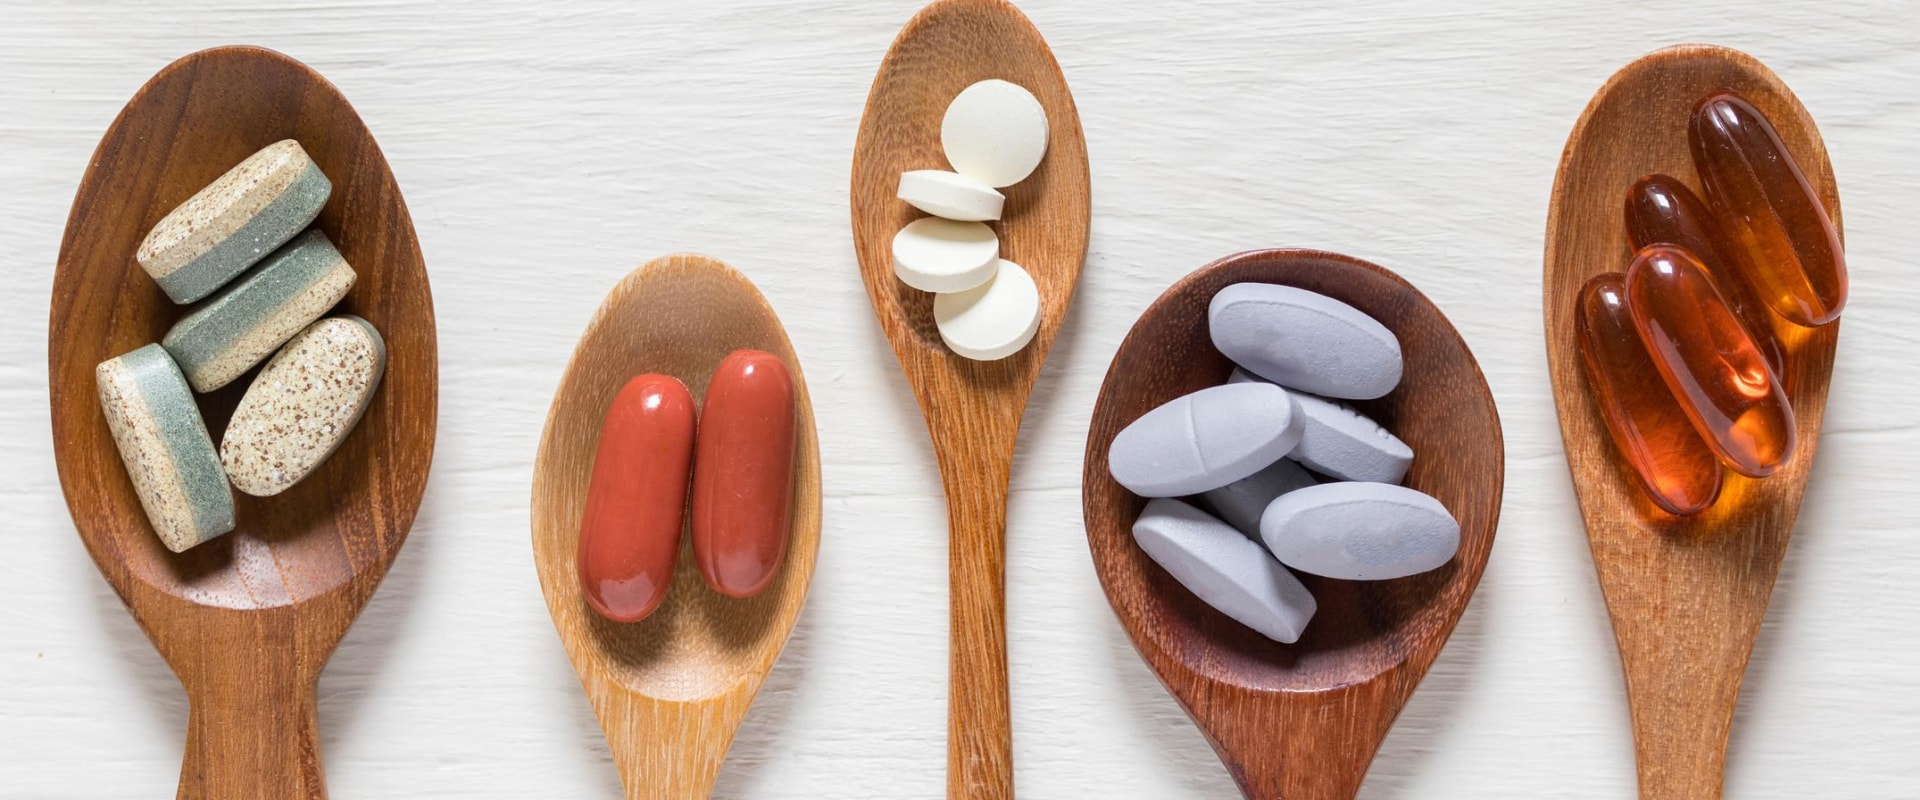 How to Choose the Right Vitamins and Supplements for Your Needs